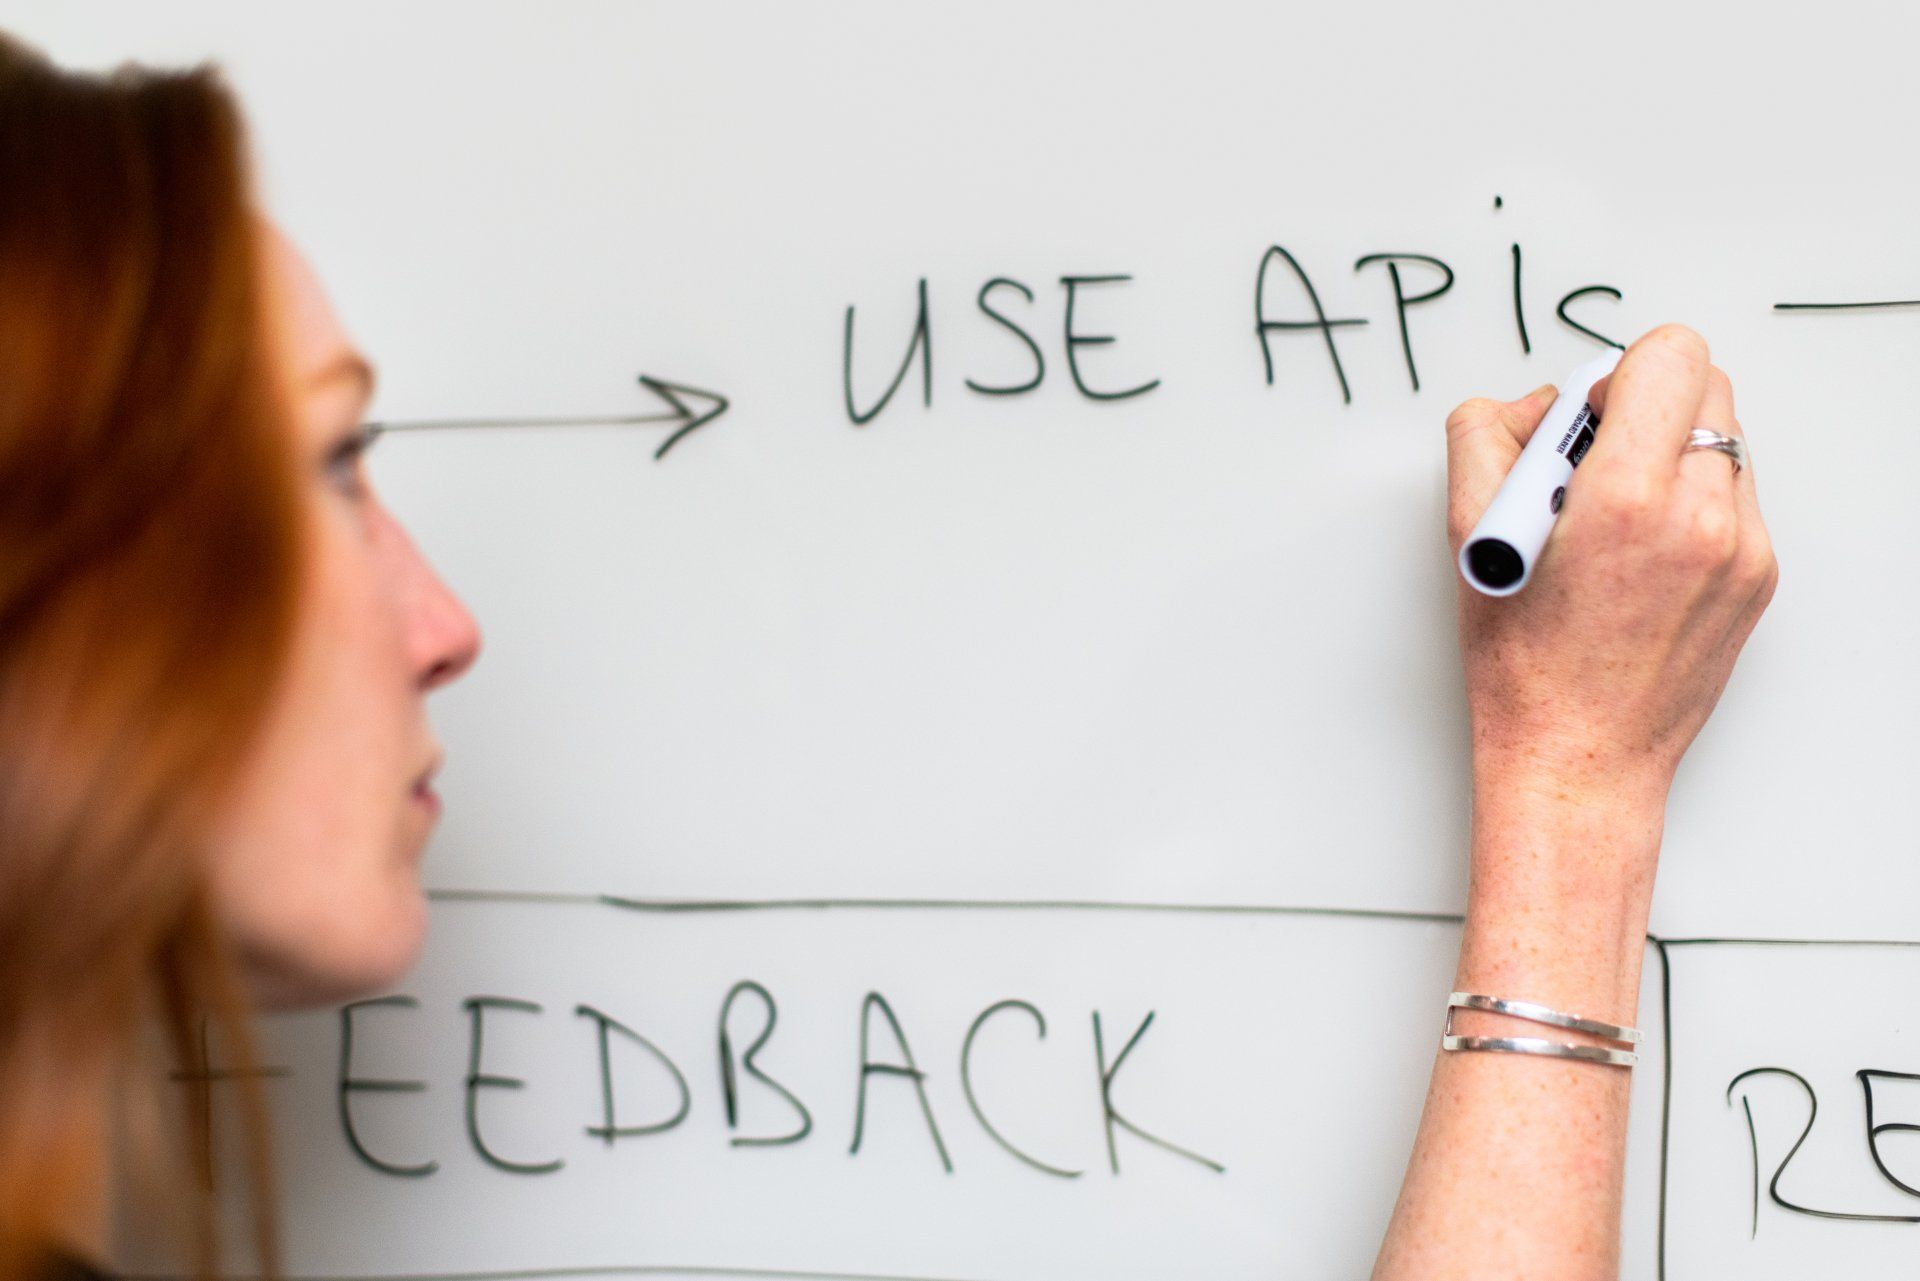 a woman is writing on a whiteboard that says use apis